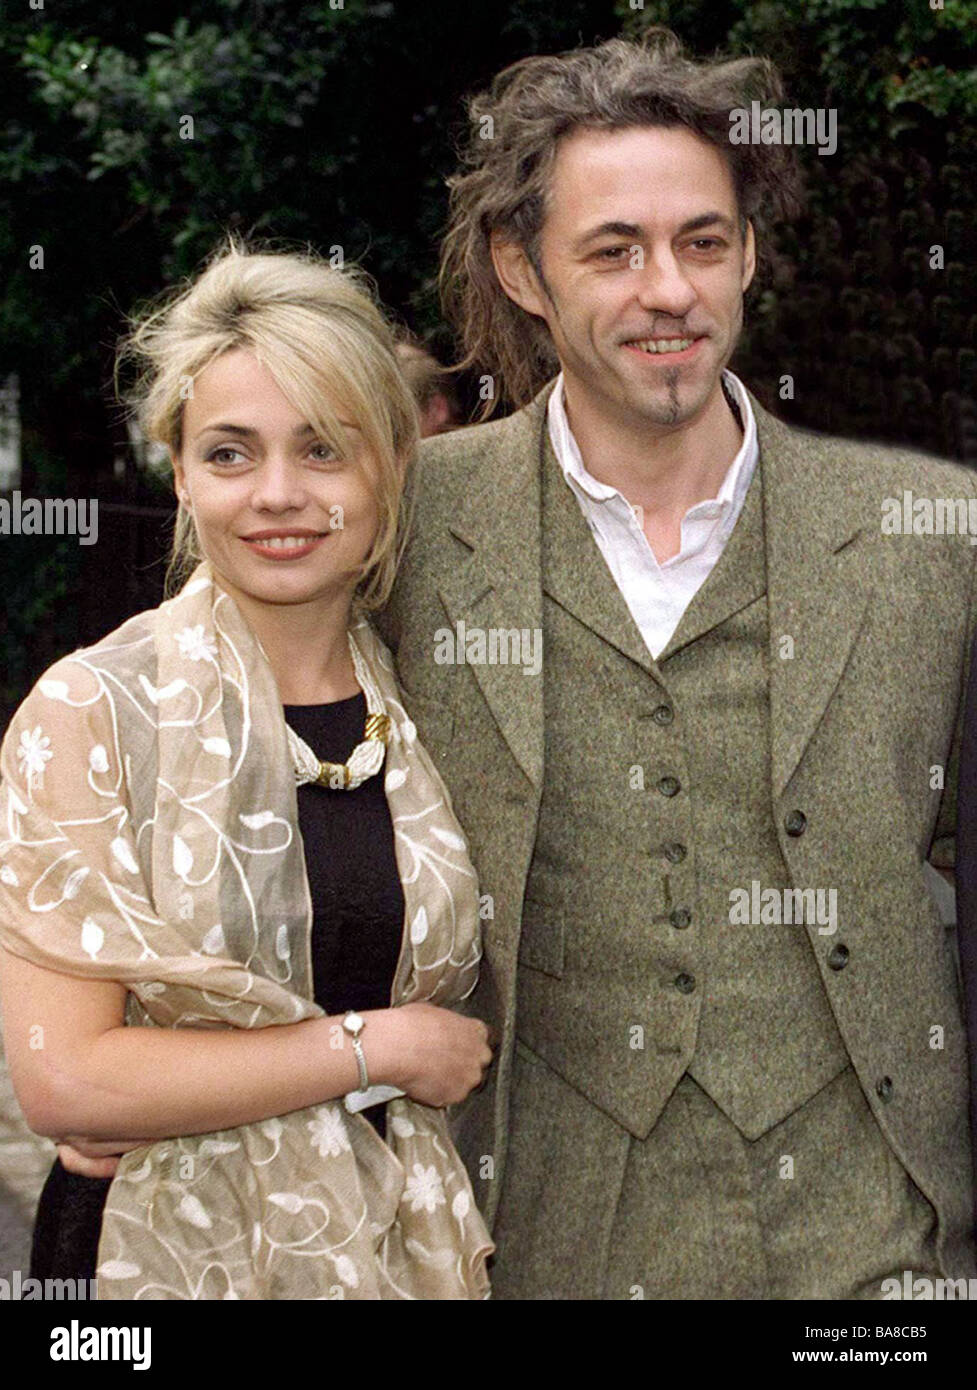 BOB GELDOF AND JEANNE MARINE AT SUMMER PARTY IN CARLYLE SQUARE, CHELSEA IN  LONDON Stock Photo - Alamy